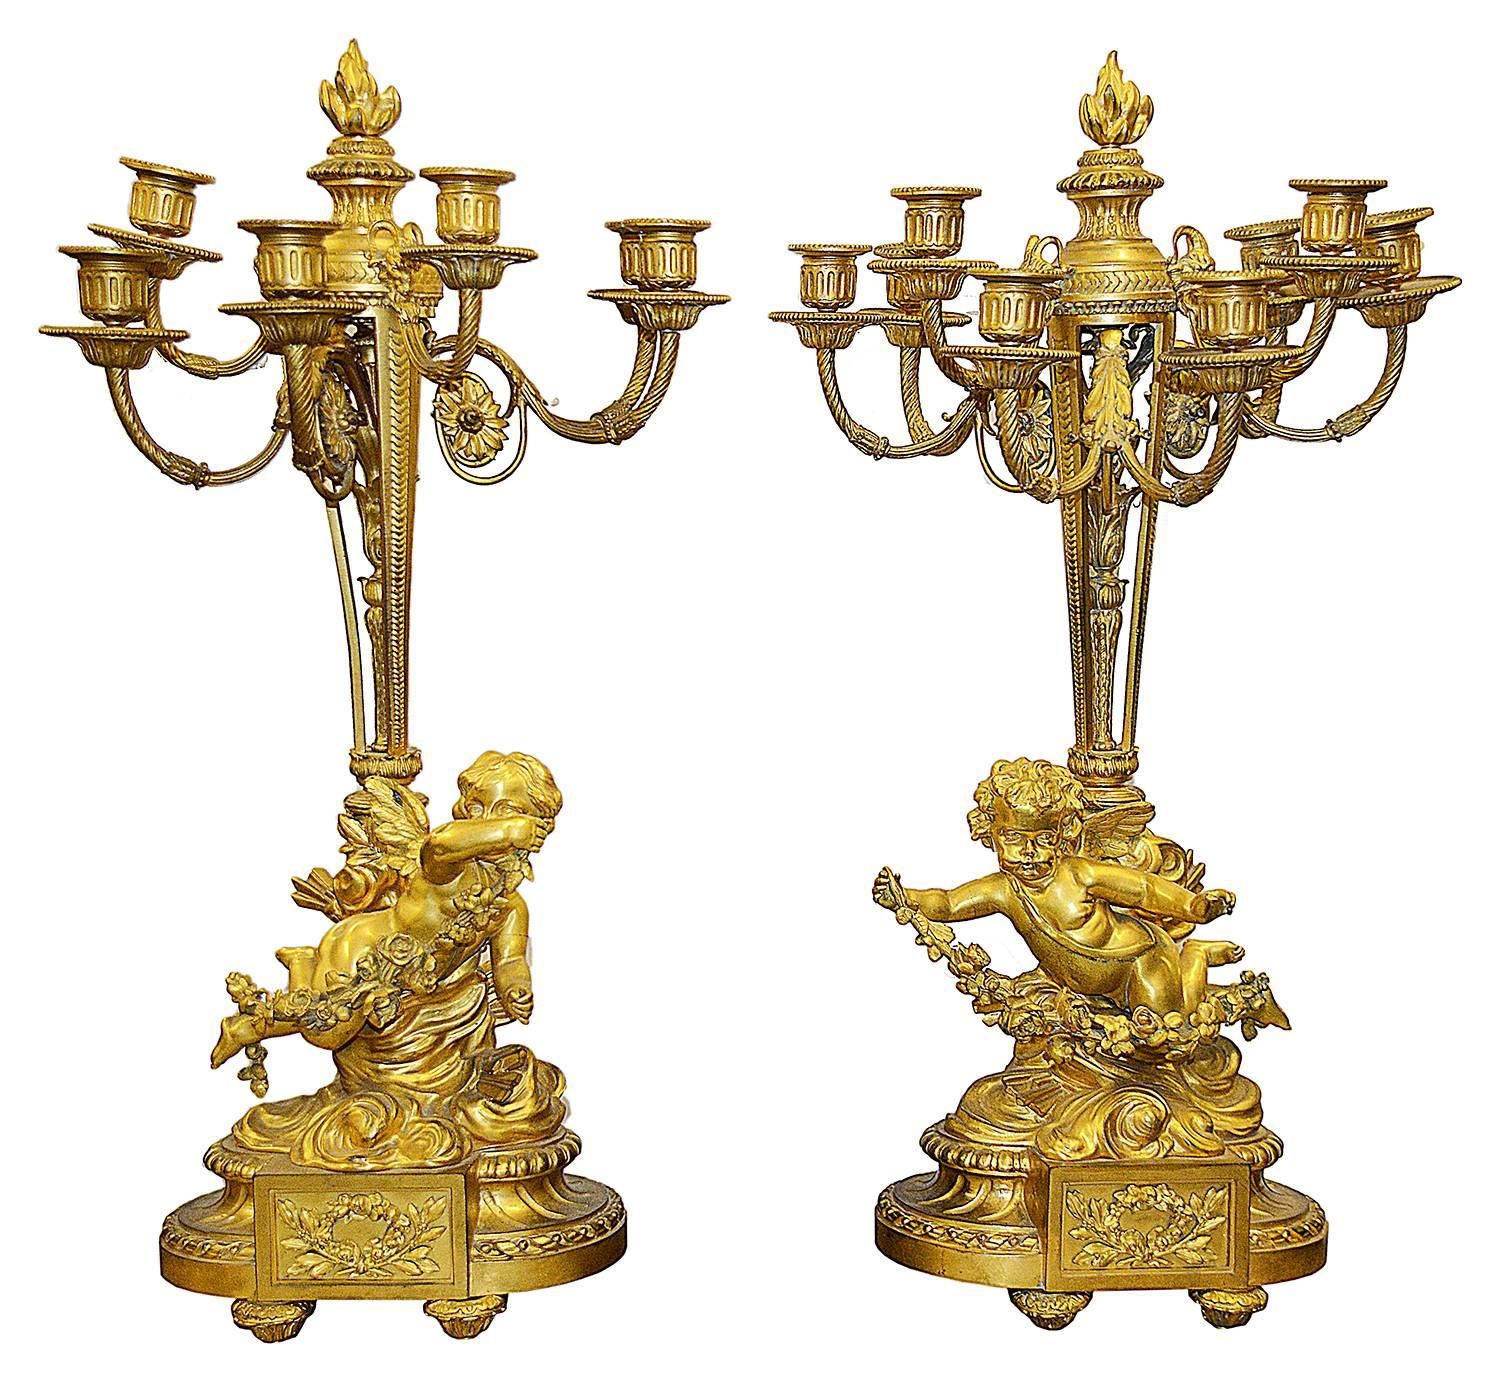 A very impressive 19th century gilded ormolu Louis XVI style clock garniture. The clock having four cherubs amongst clouds surrounding it, with floral swags. The movement has an eight day, hour and half hour striking movement. The pair of